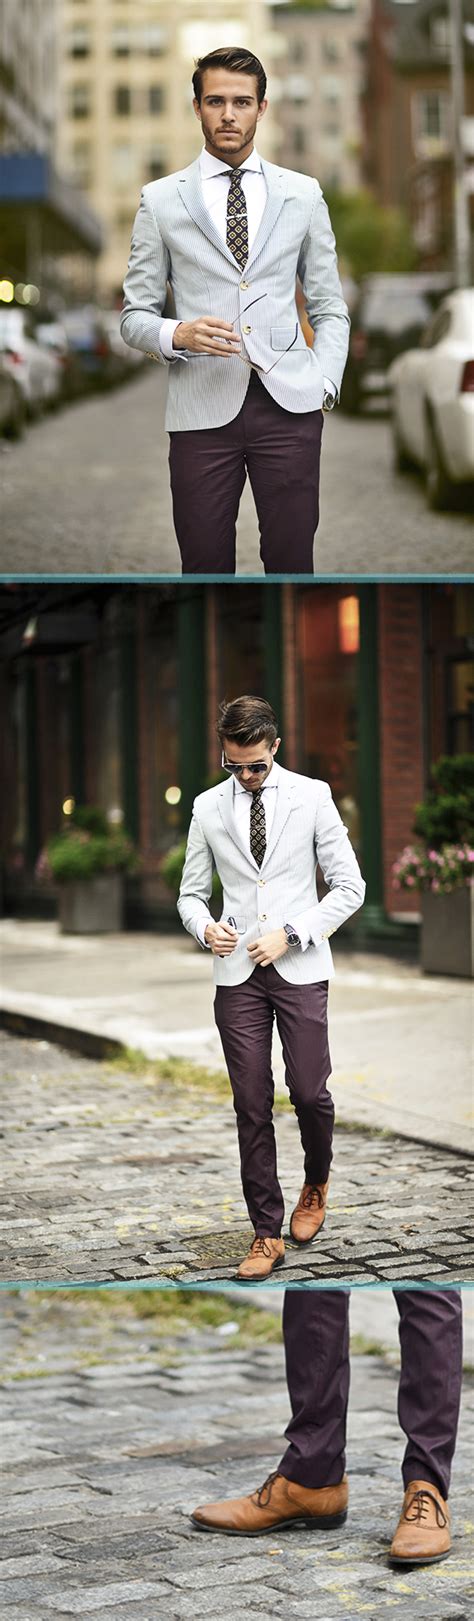 Look Of The Day The Modern Suit The Journey 21